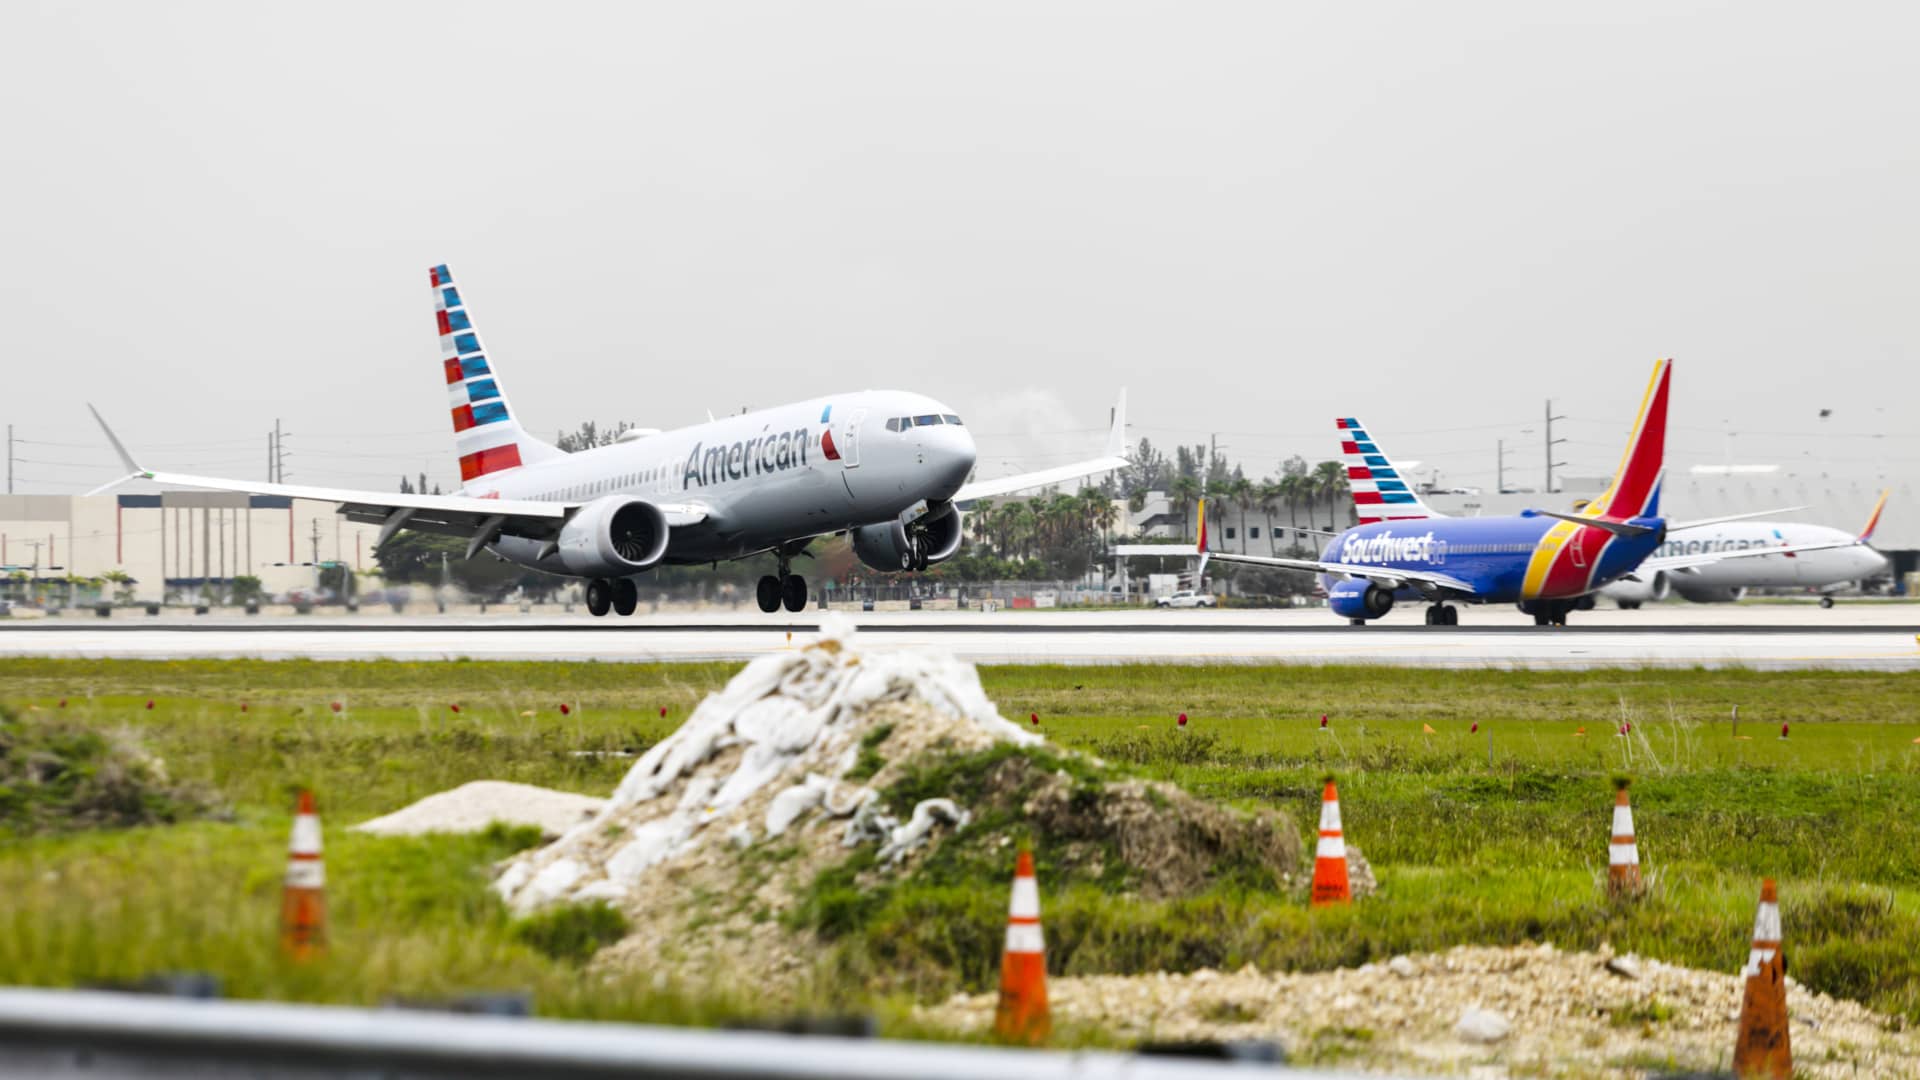 A passenger aircraft operated by American Airlines Group Inc. lands at Miami International Airport in Miami, Florida, U.S., on Wednesday, June 16, 2021.